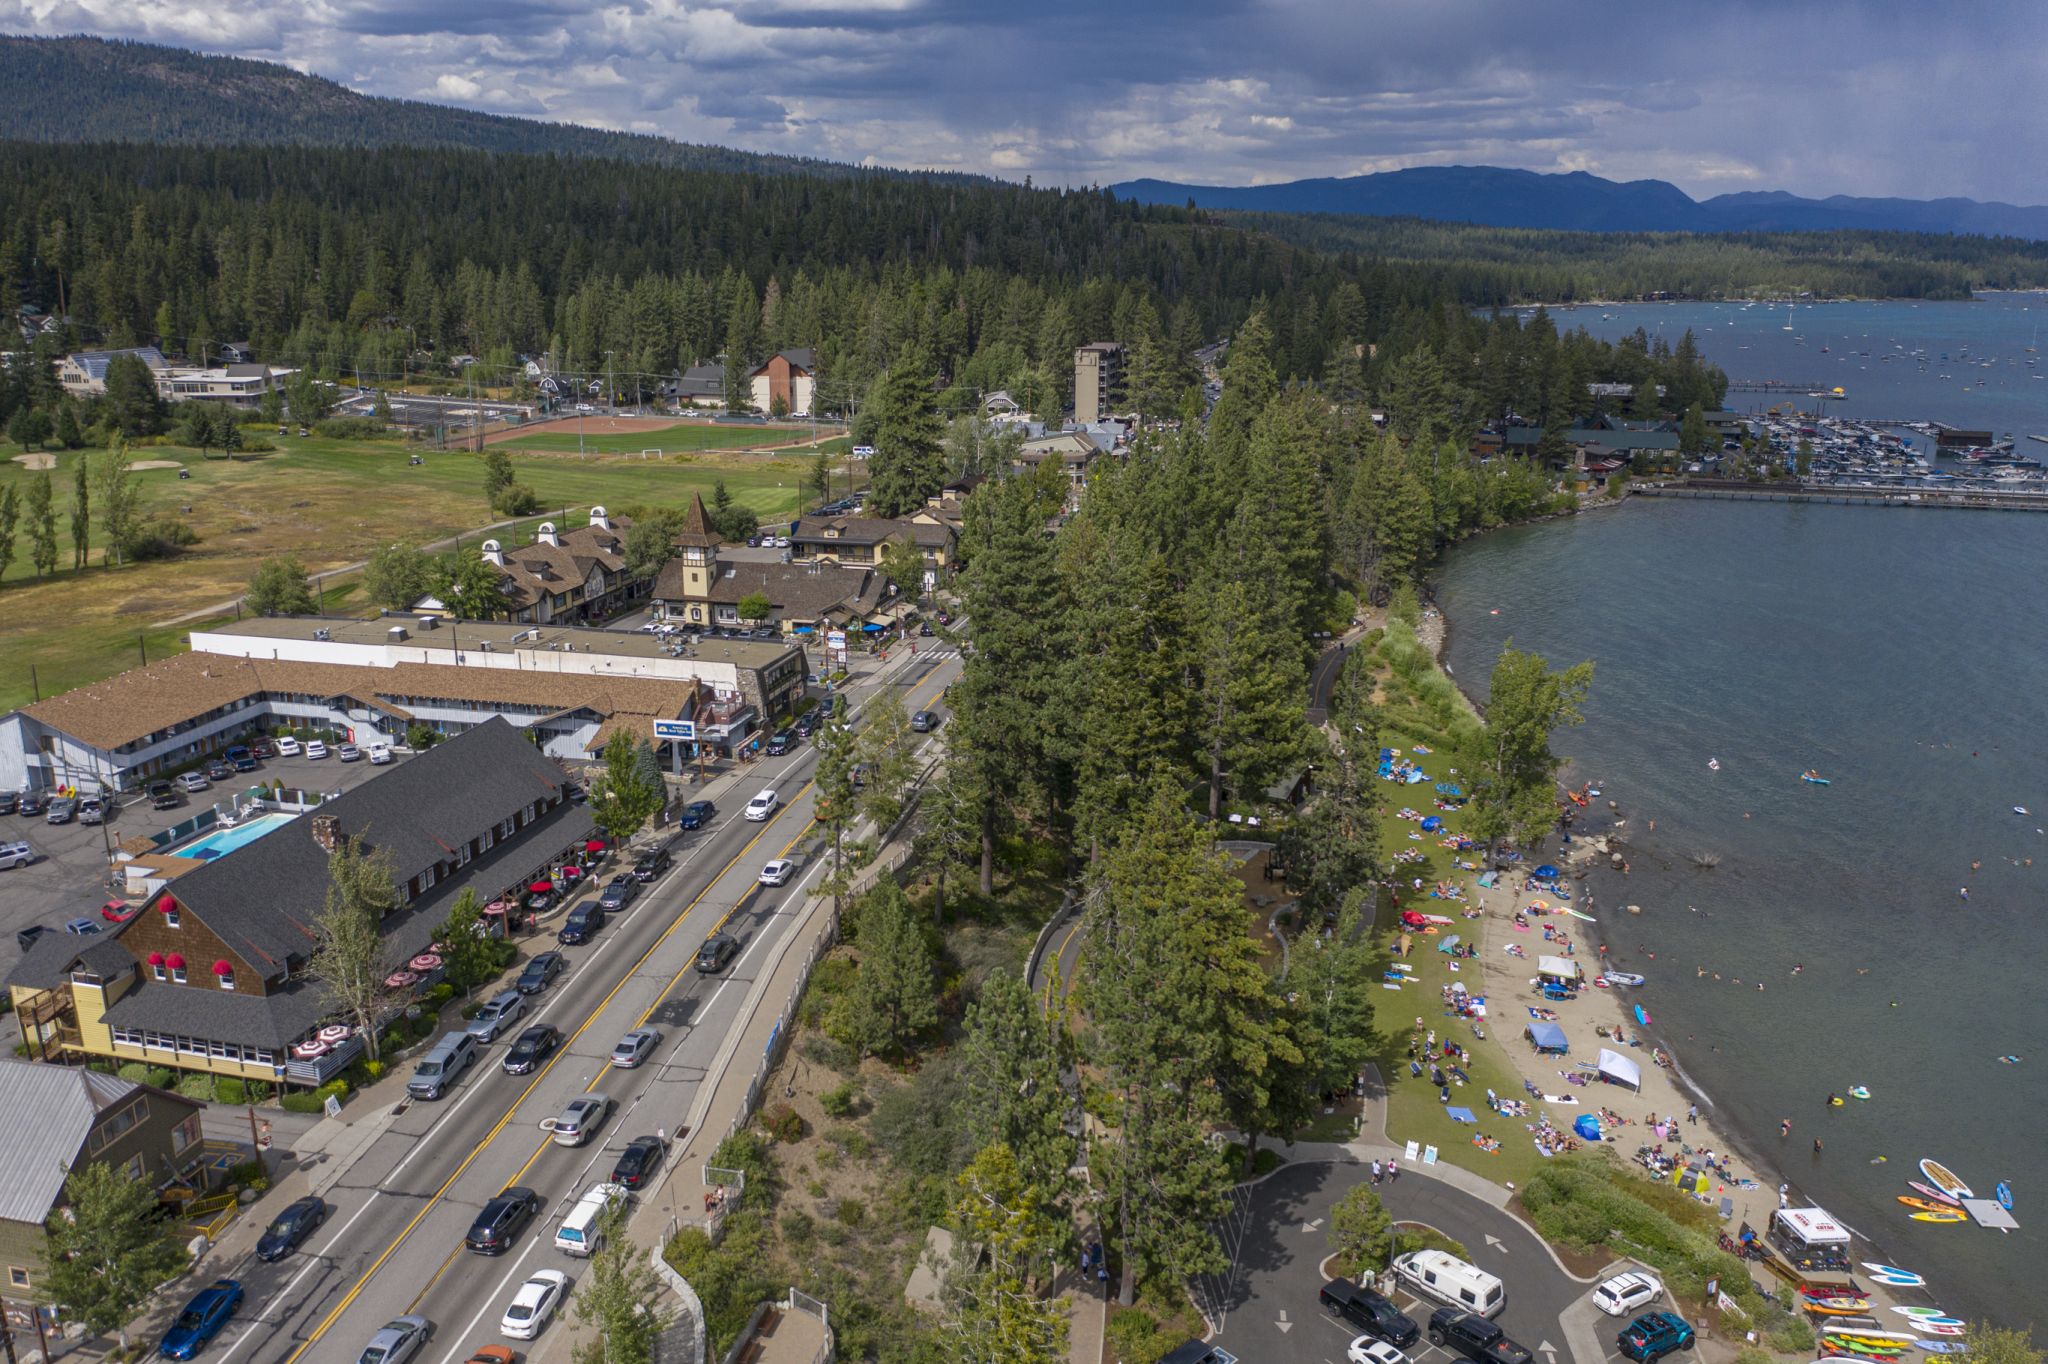 ‘It has never stopped’: Tahoe residents blame Airbnb, county for nonstop tourism in pandemic